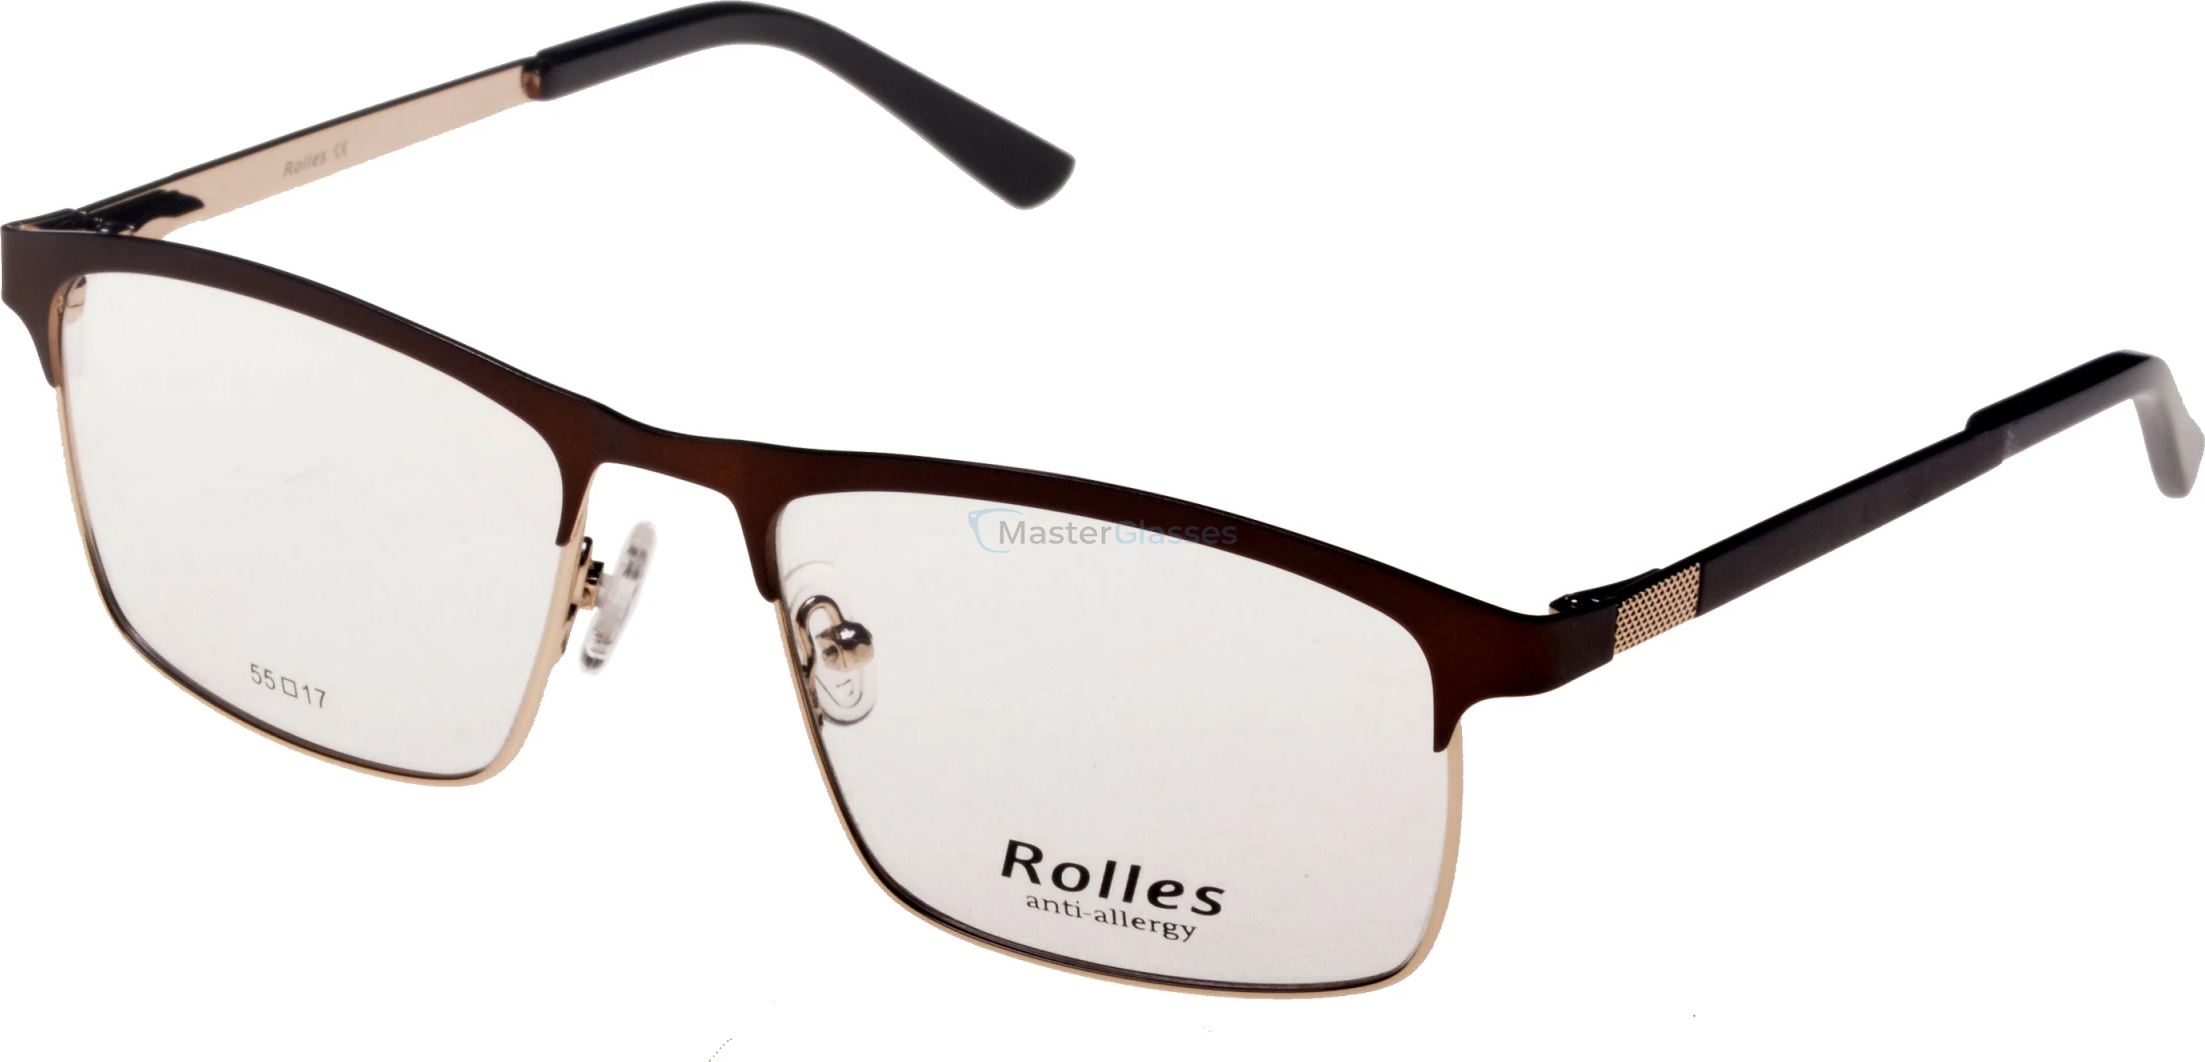  Rolles 677 03